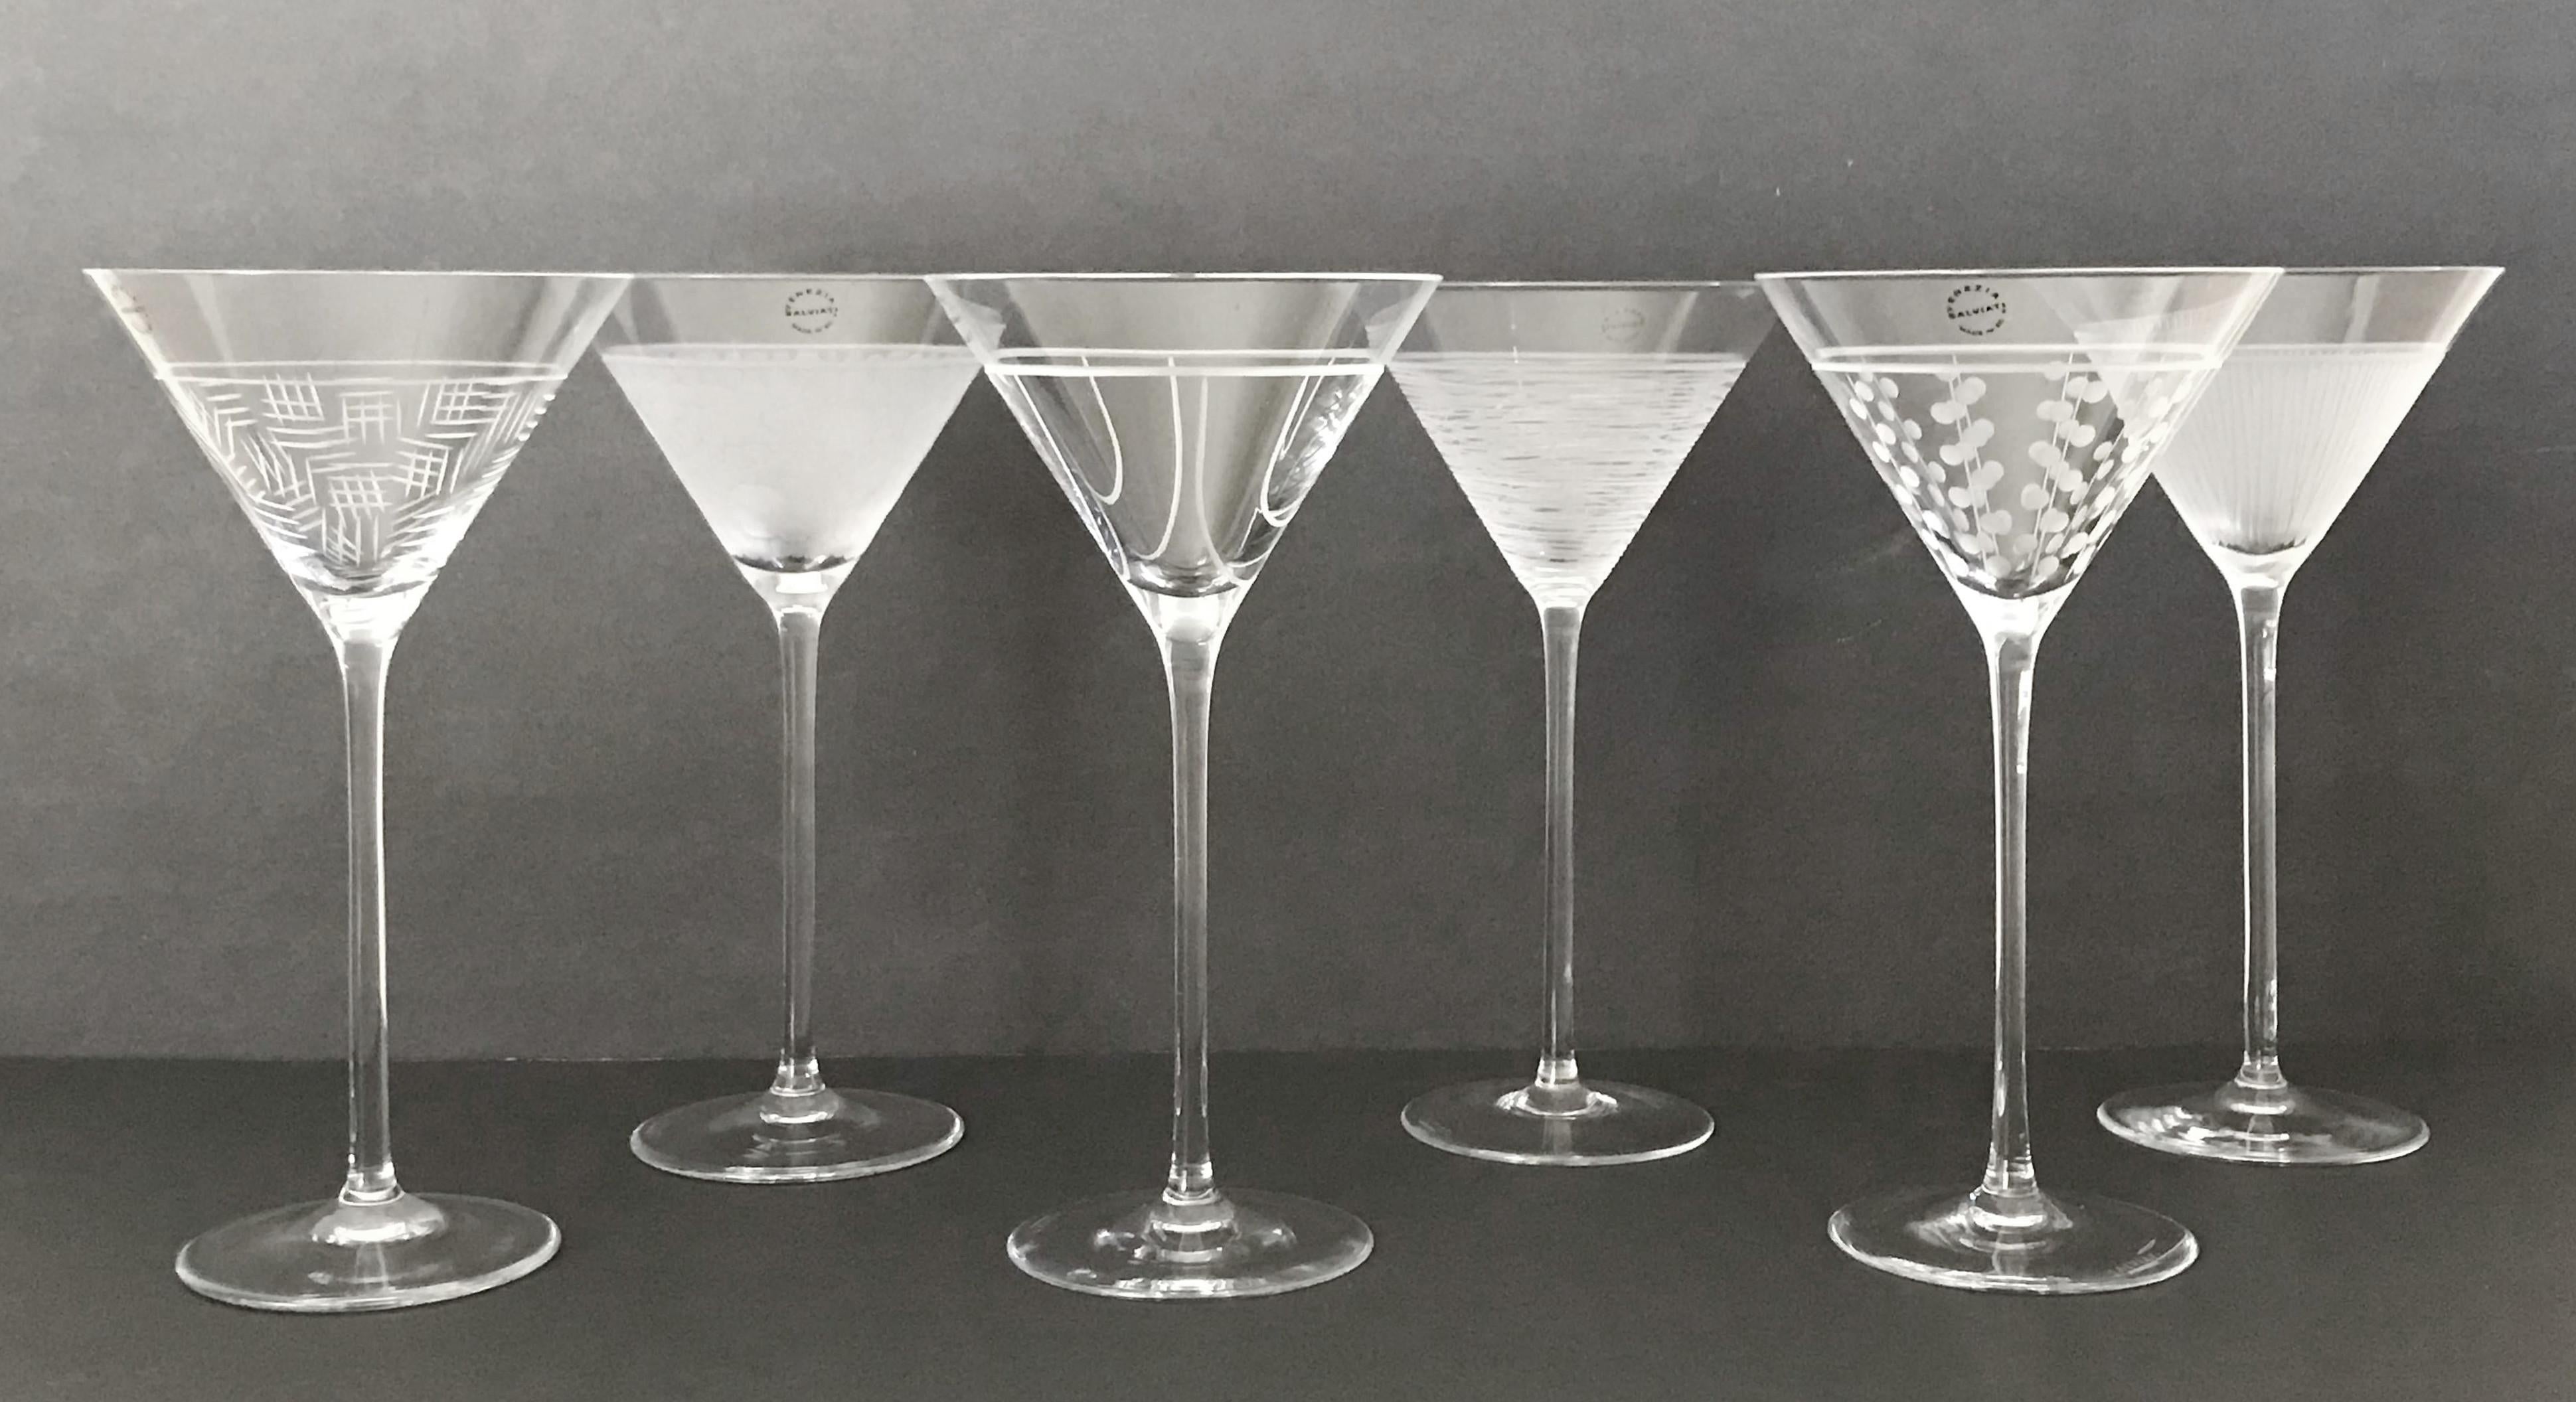 Set of 6 martini glasses by Salviati, in unique handmade patterns with original 